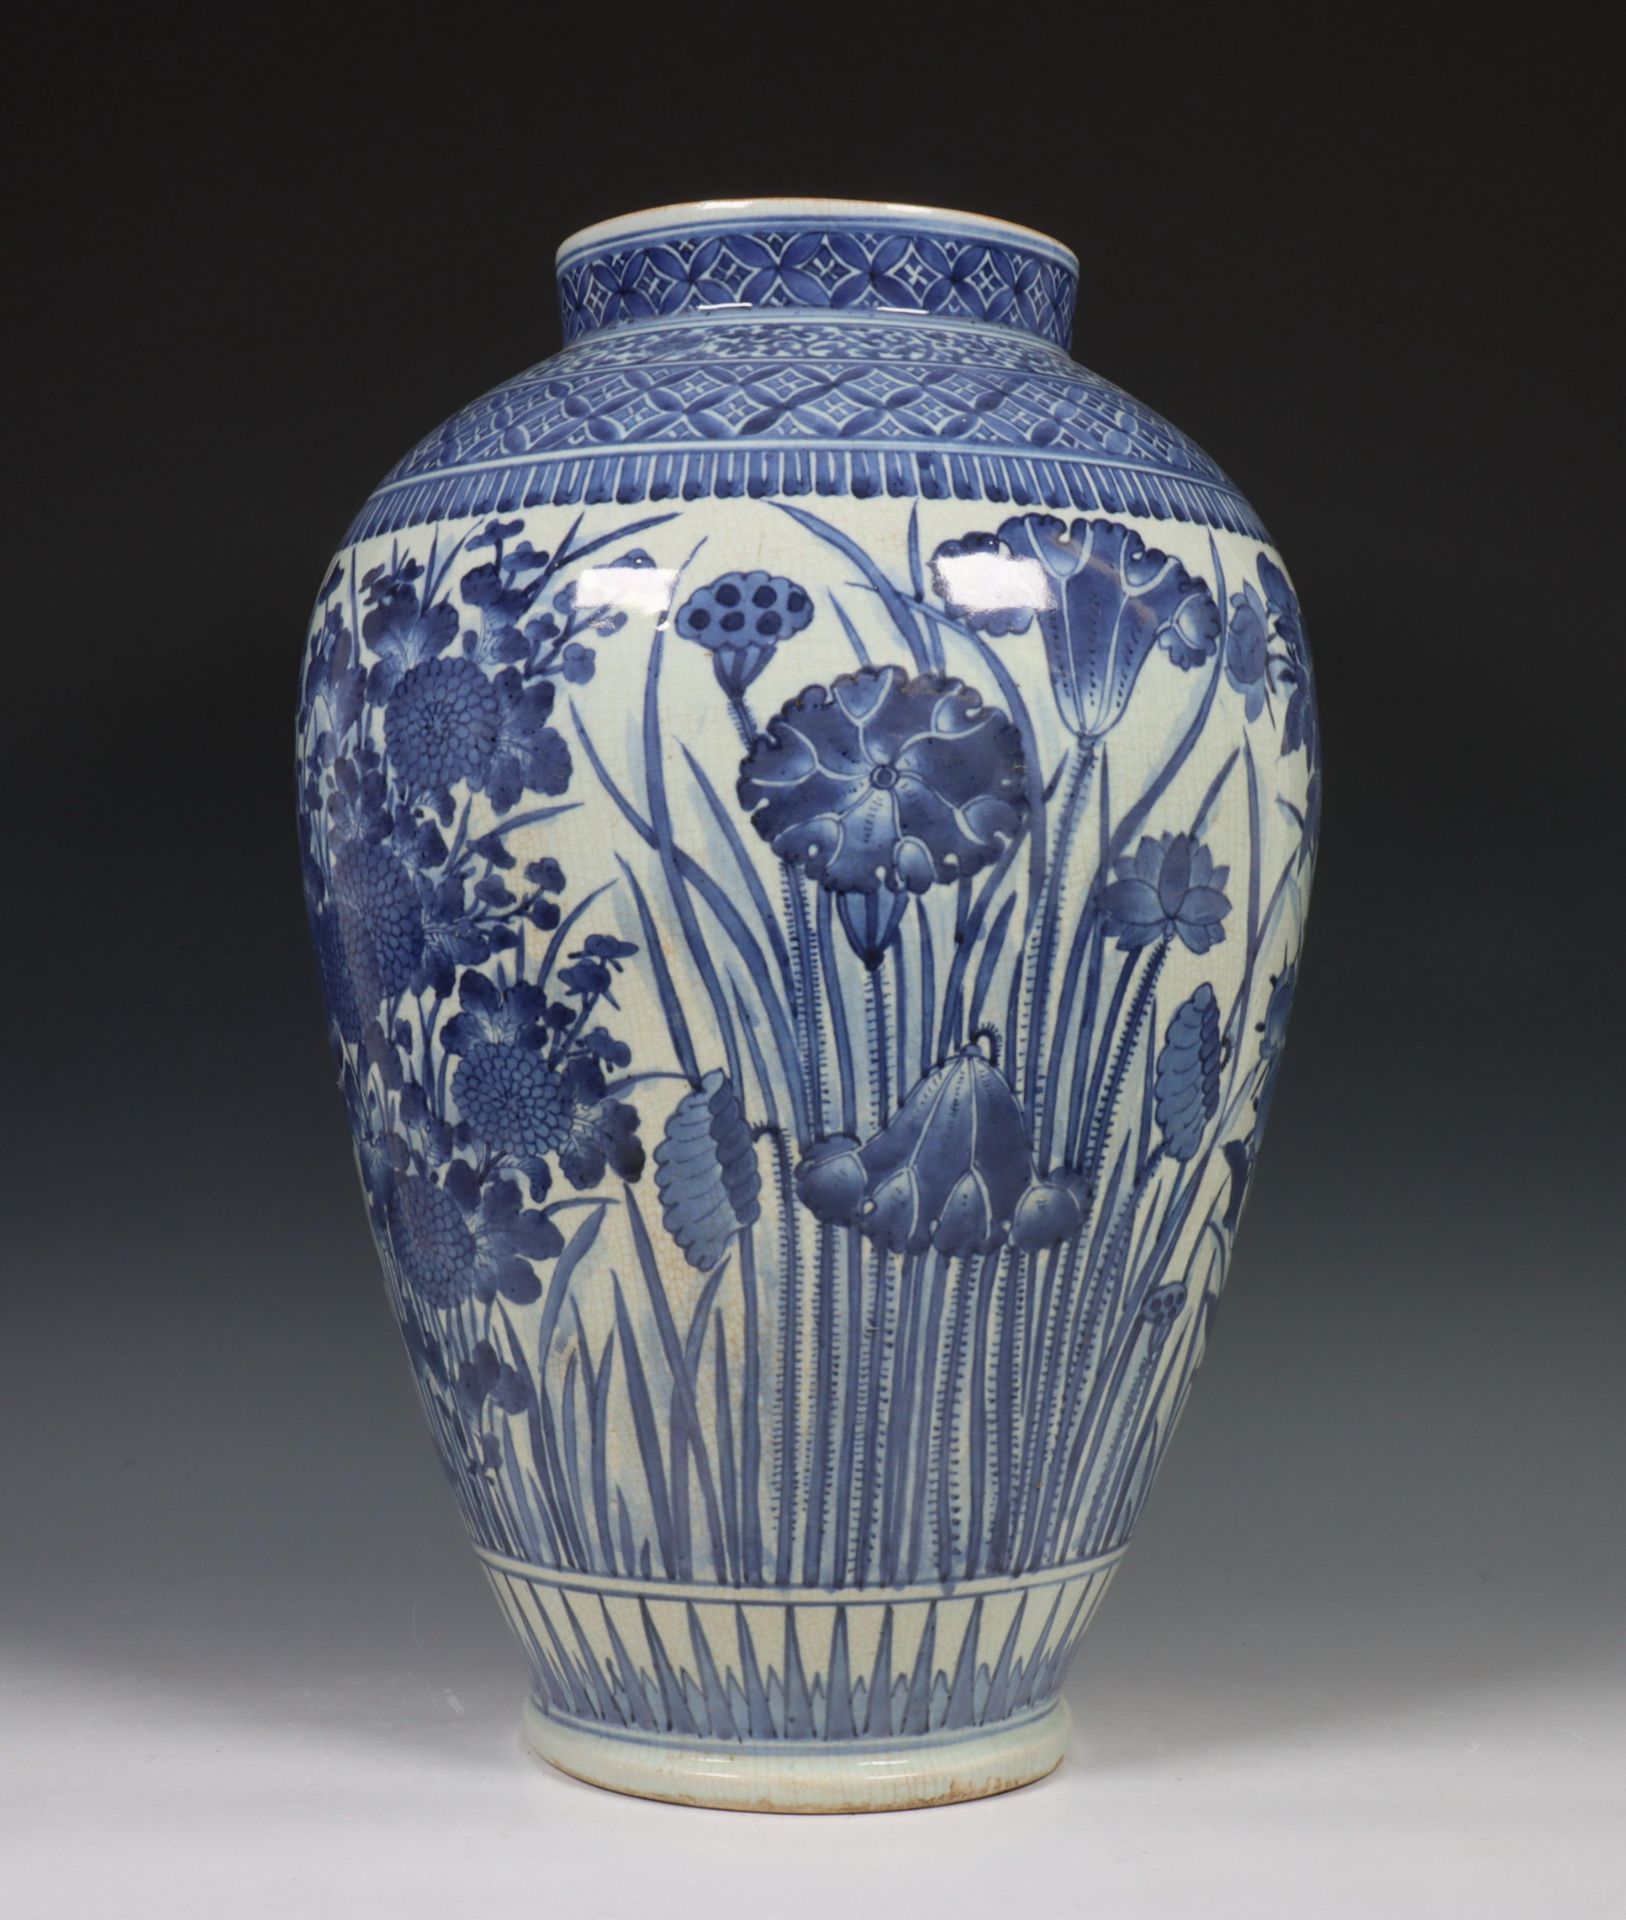 Japan, blue and white porcelain baluster vase, Meiji period, 19th century, decorated with prunus, - Image 5 of 11